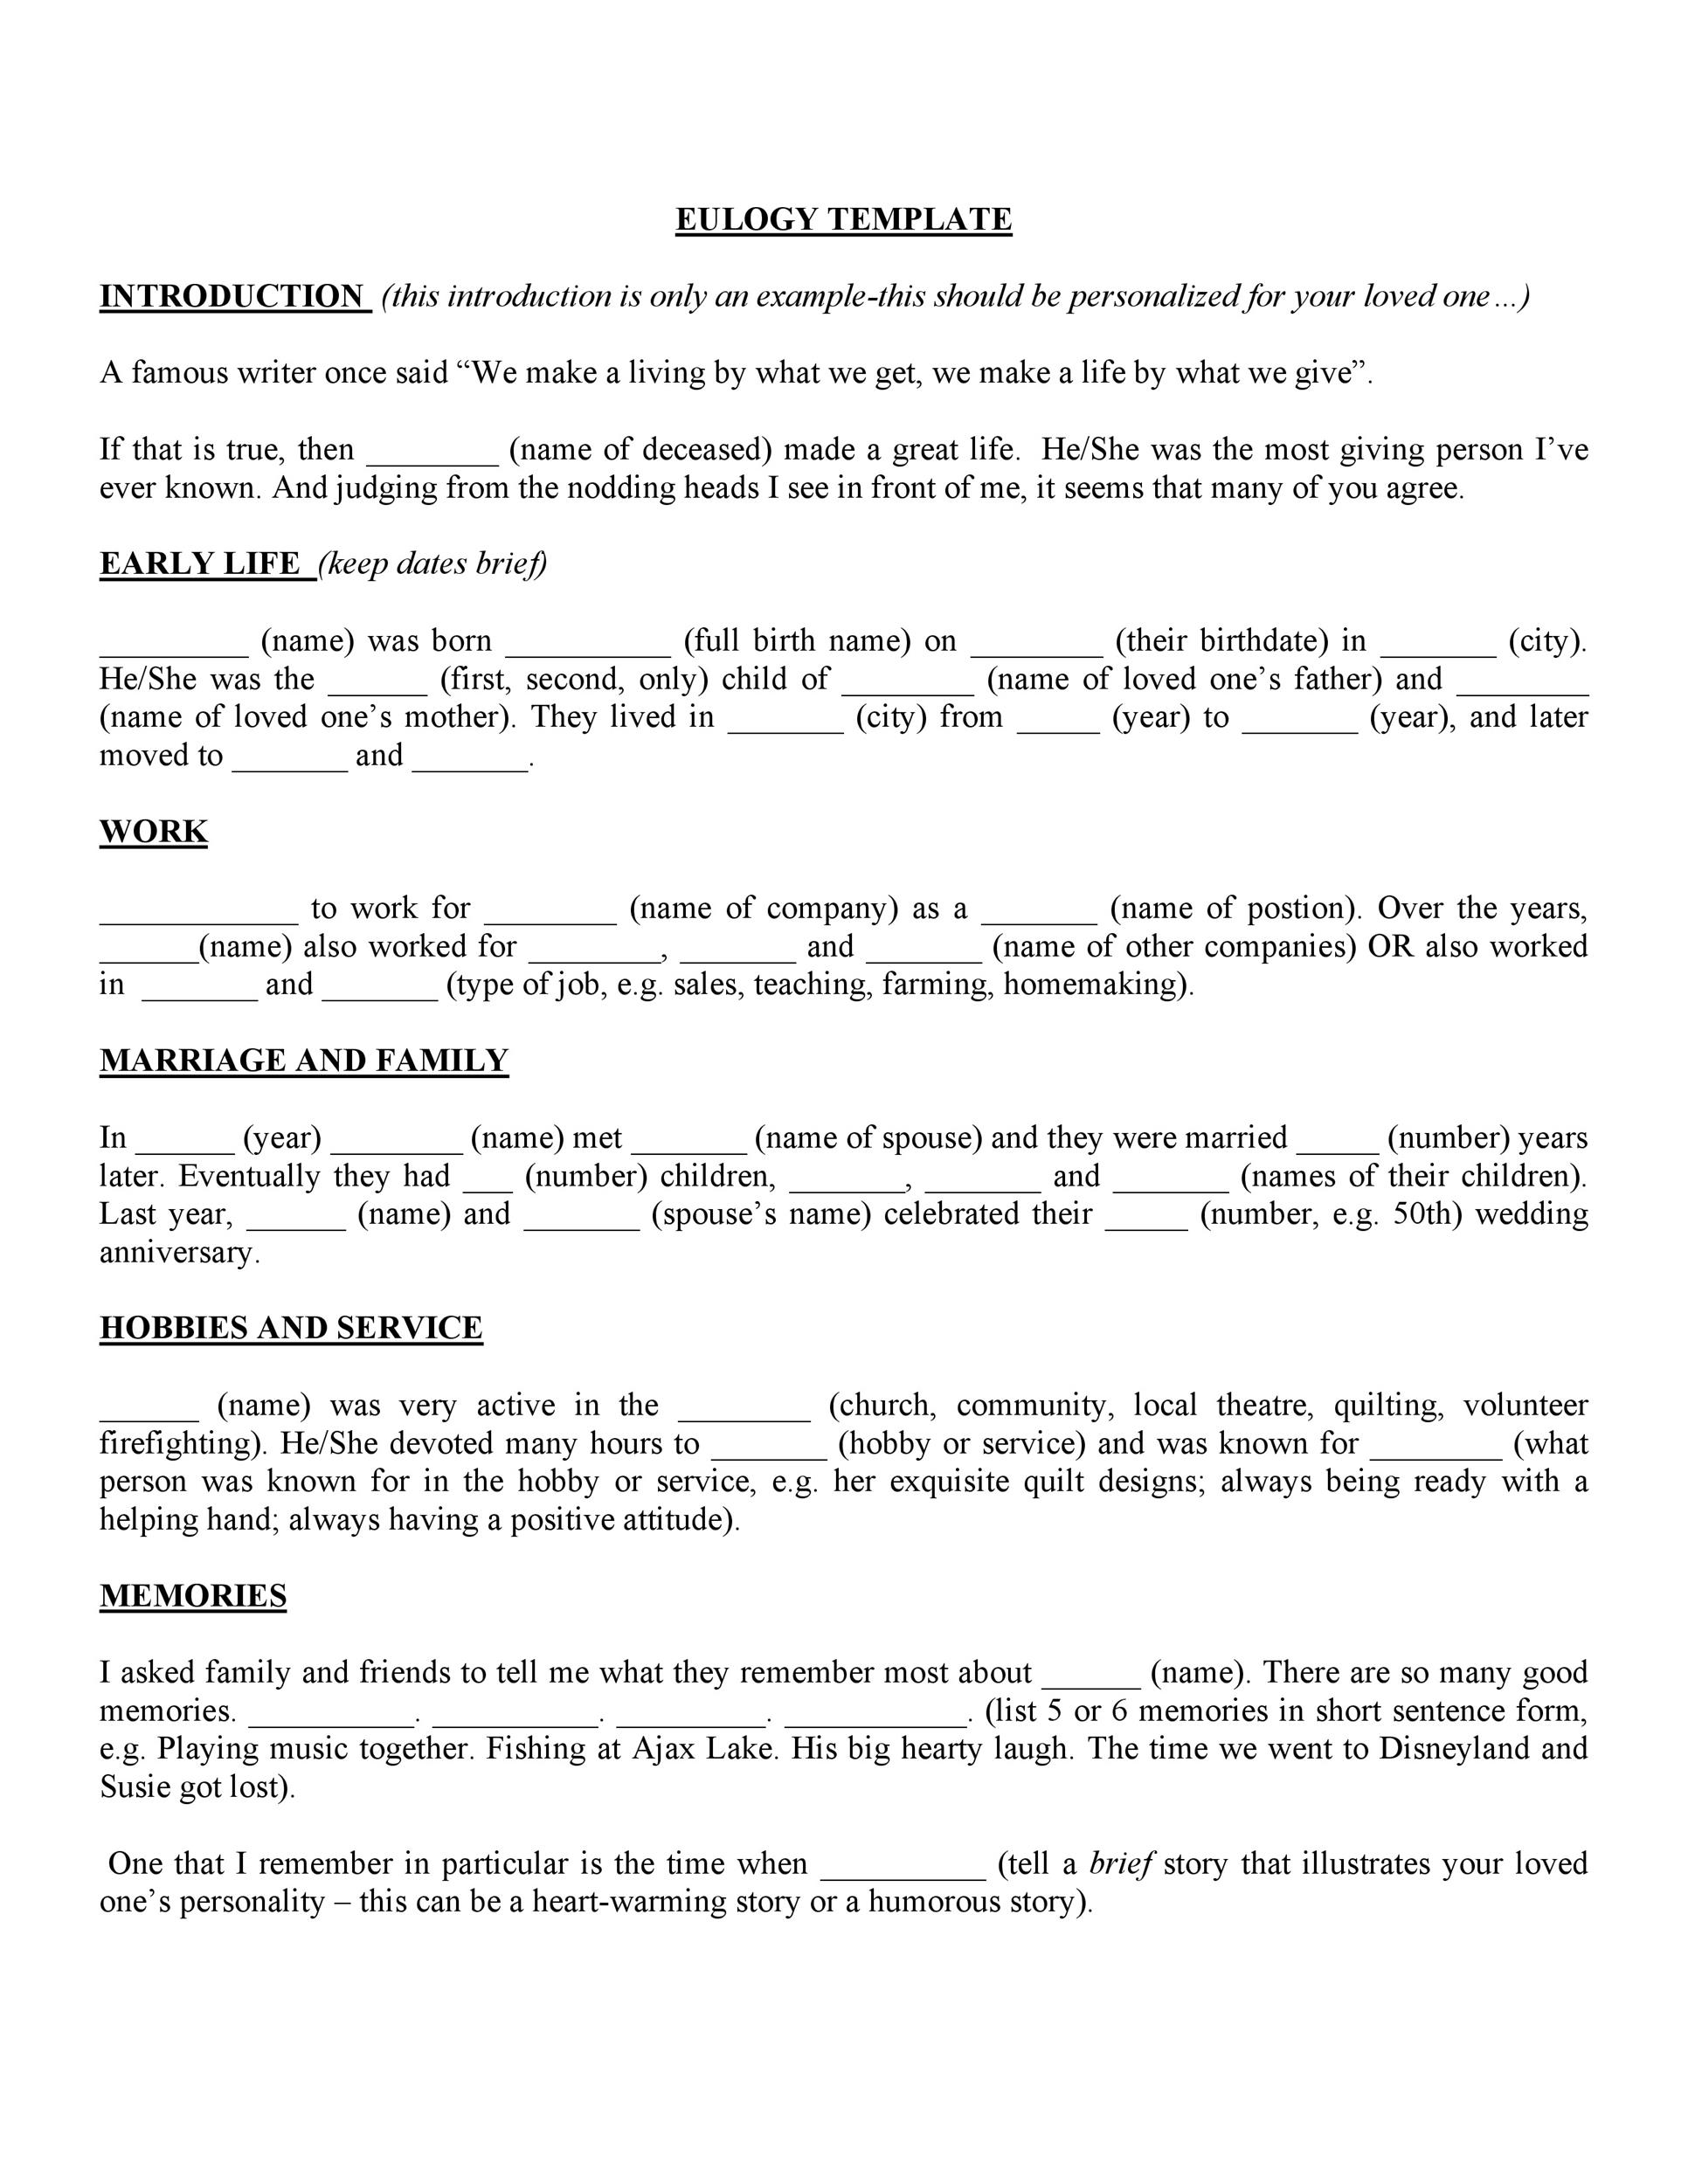 50 Best Eulogy Templates For Relatives Or Friends ᐅ Templatelab